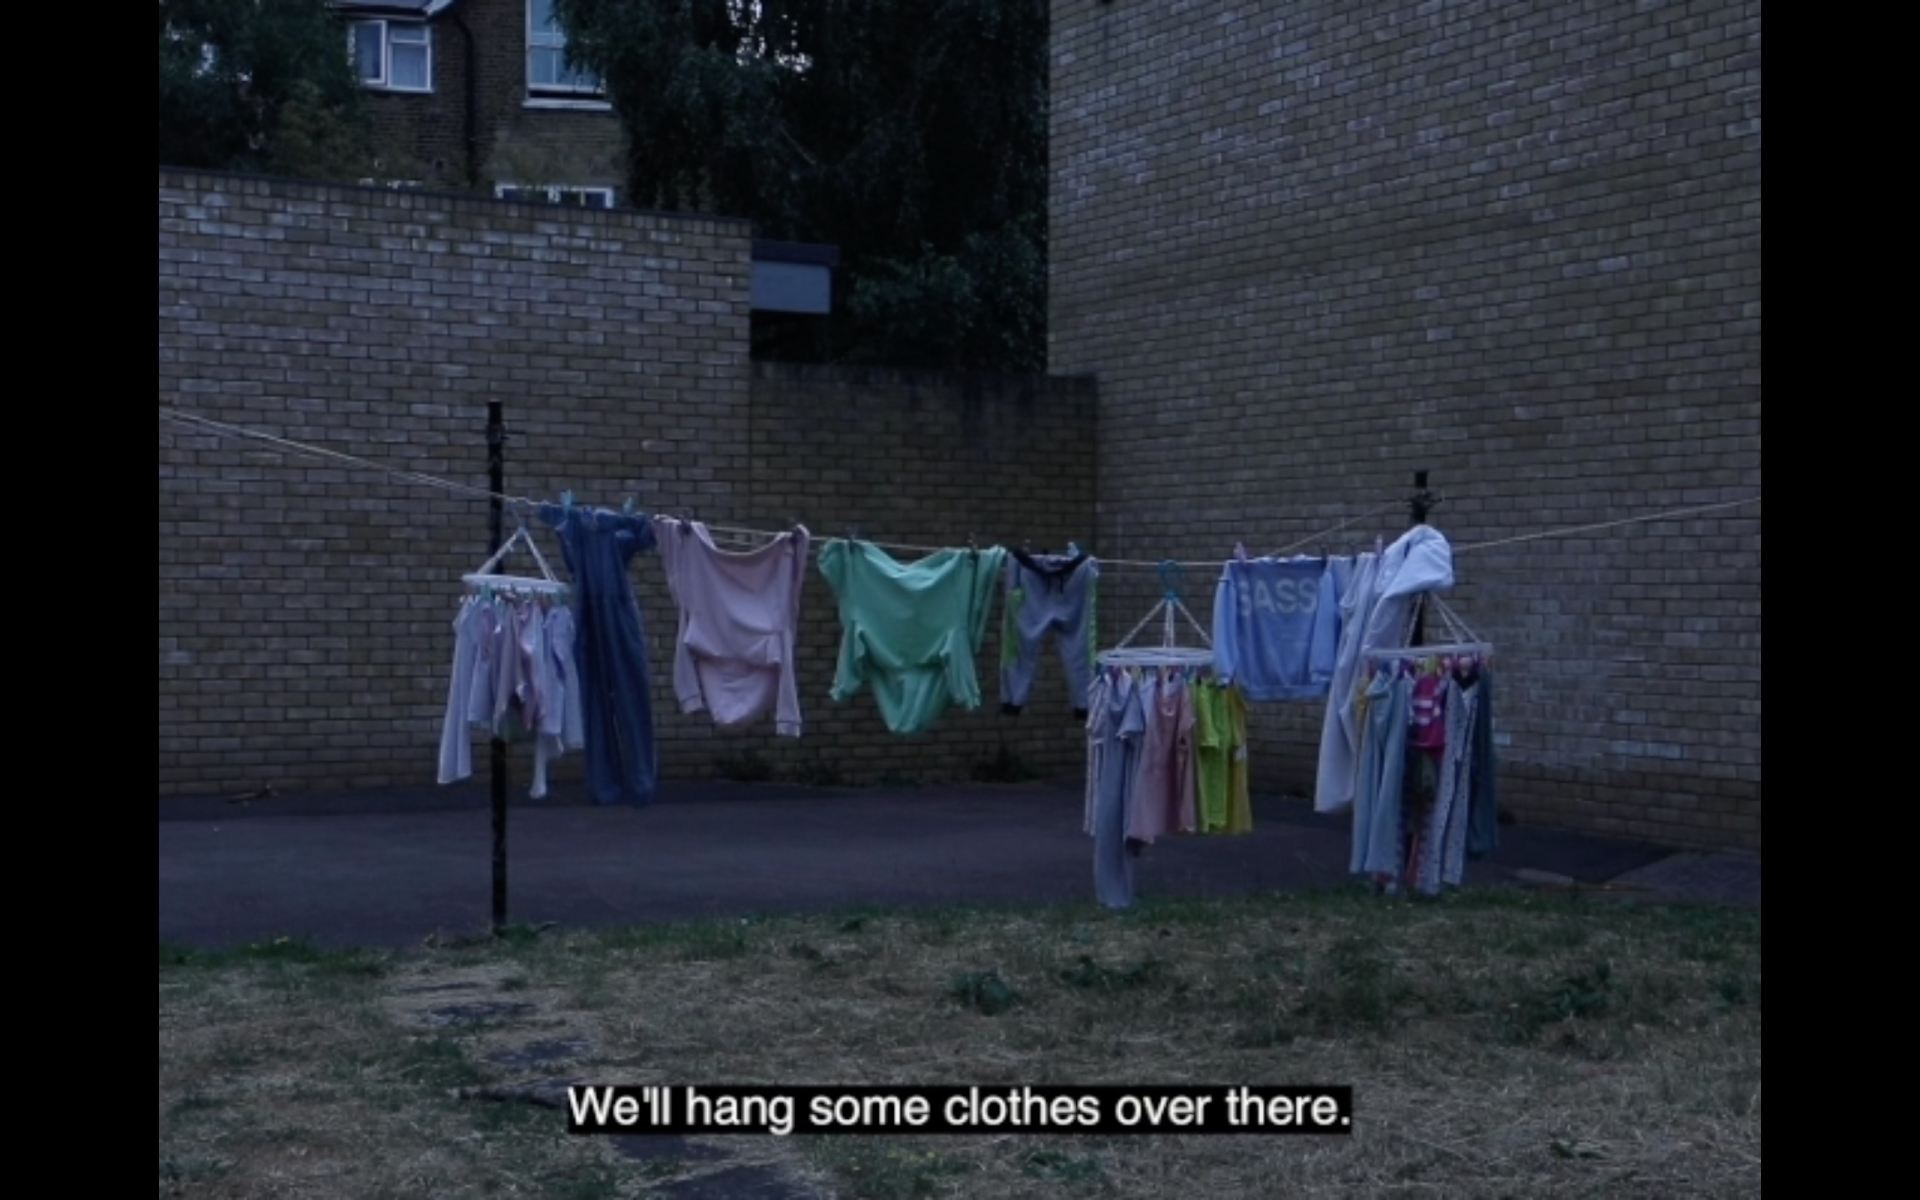 A video still of several brightly coloured clothes on a washing line at dusk.